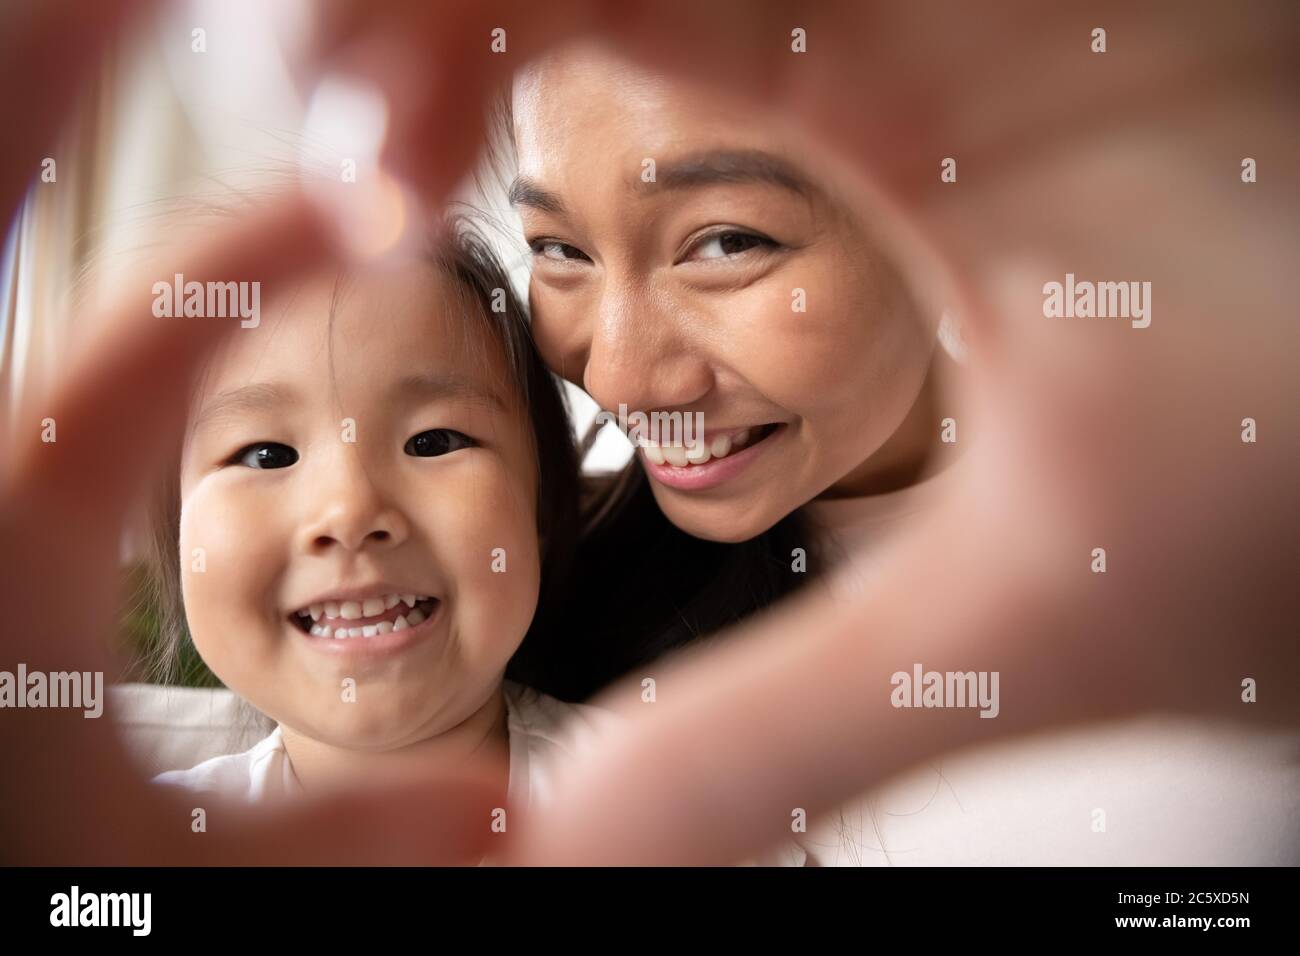 Little asian baby girl making heart gesture with smiling mom. Stock Photo